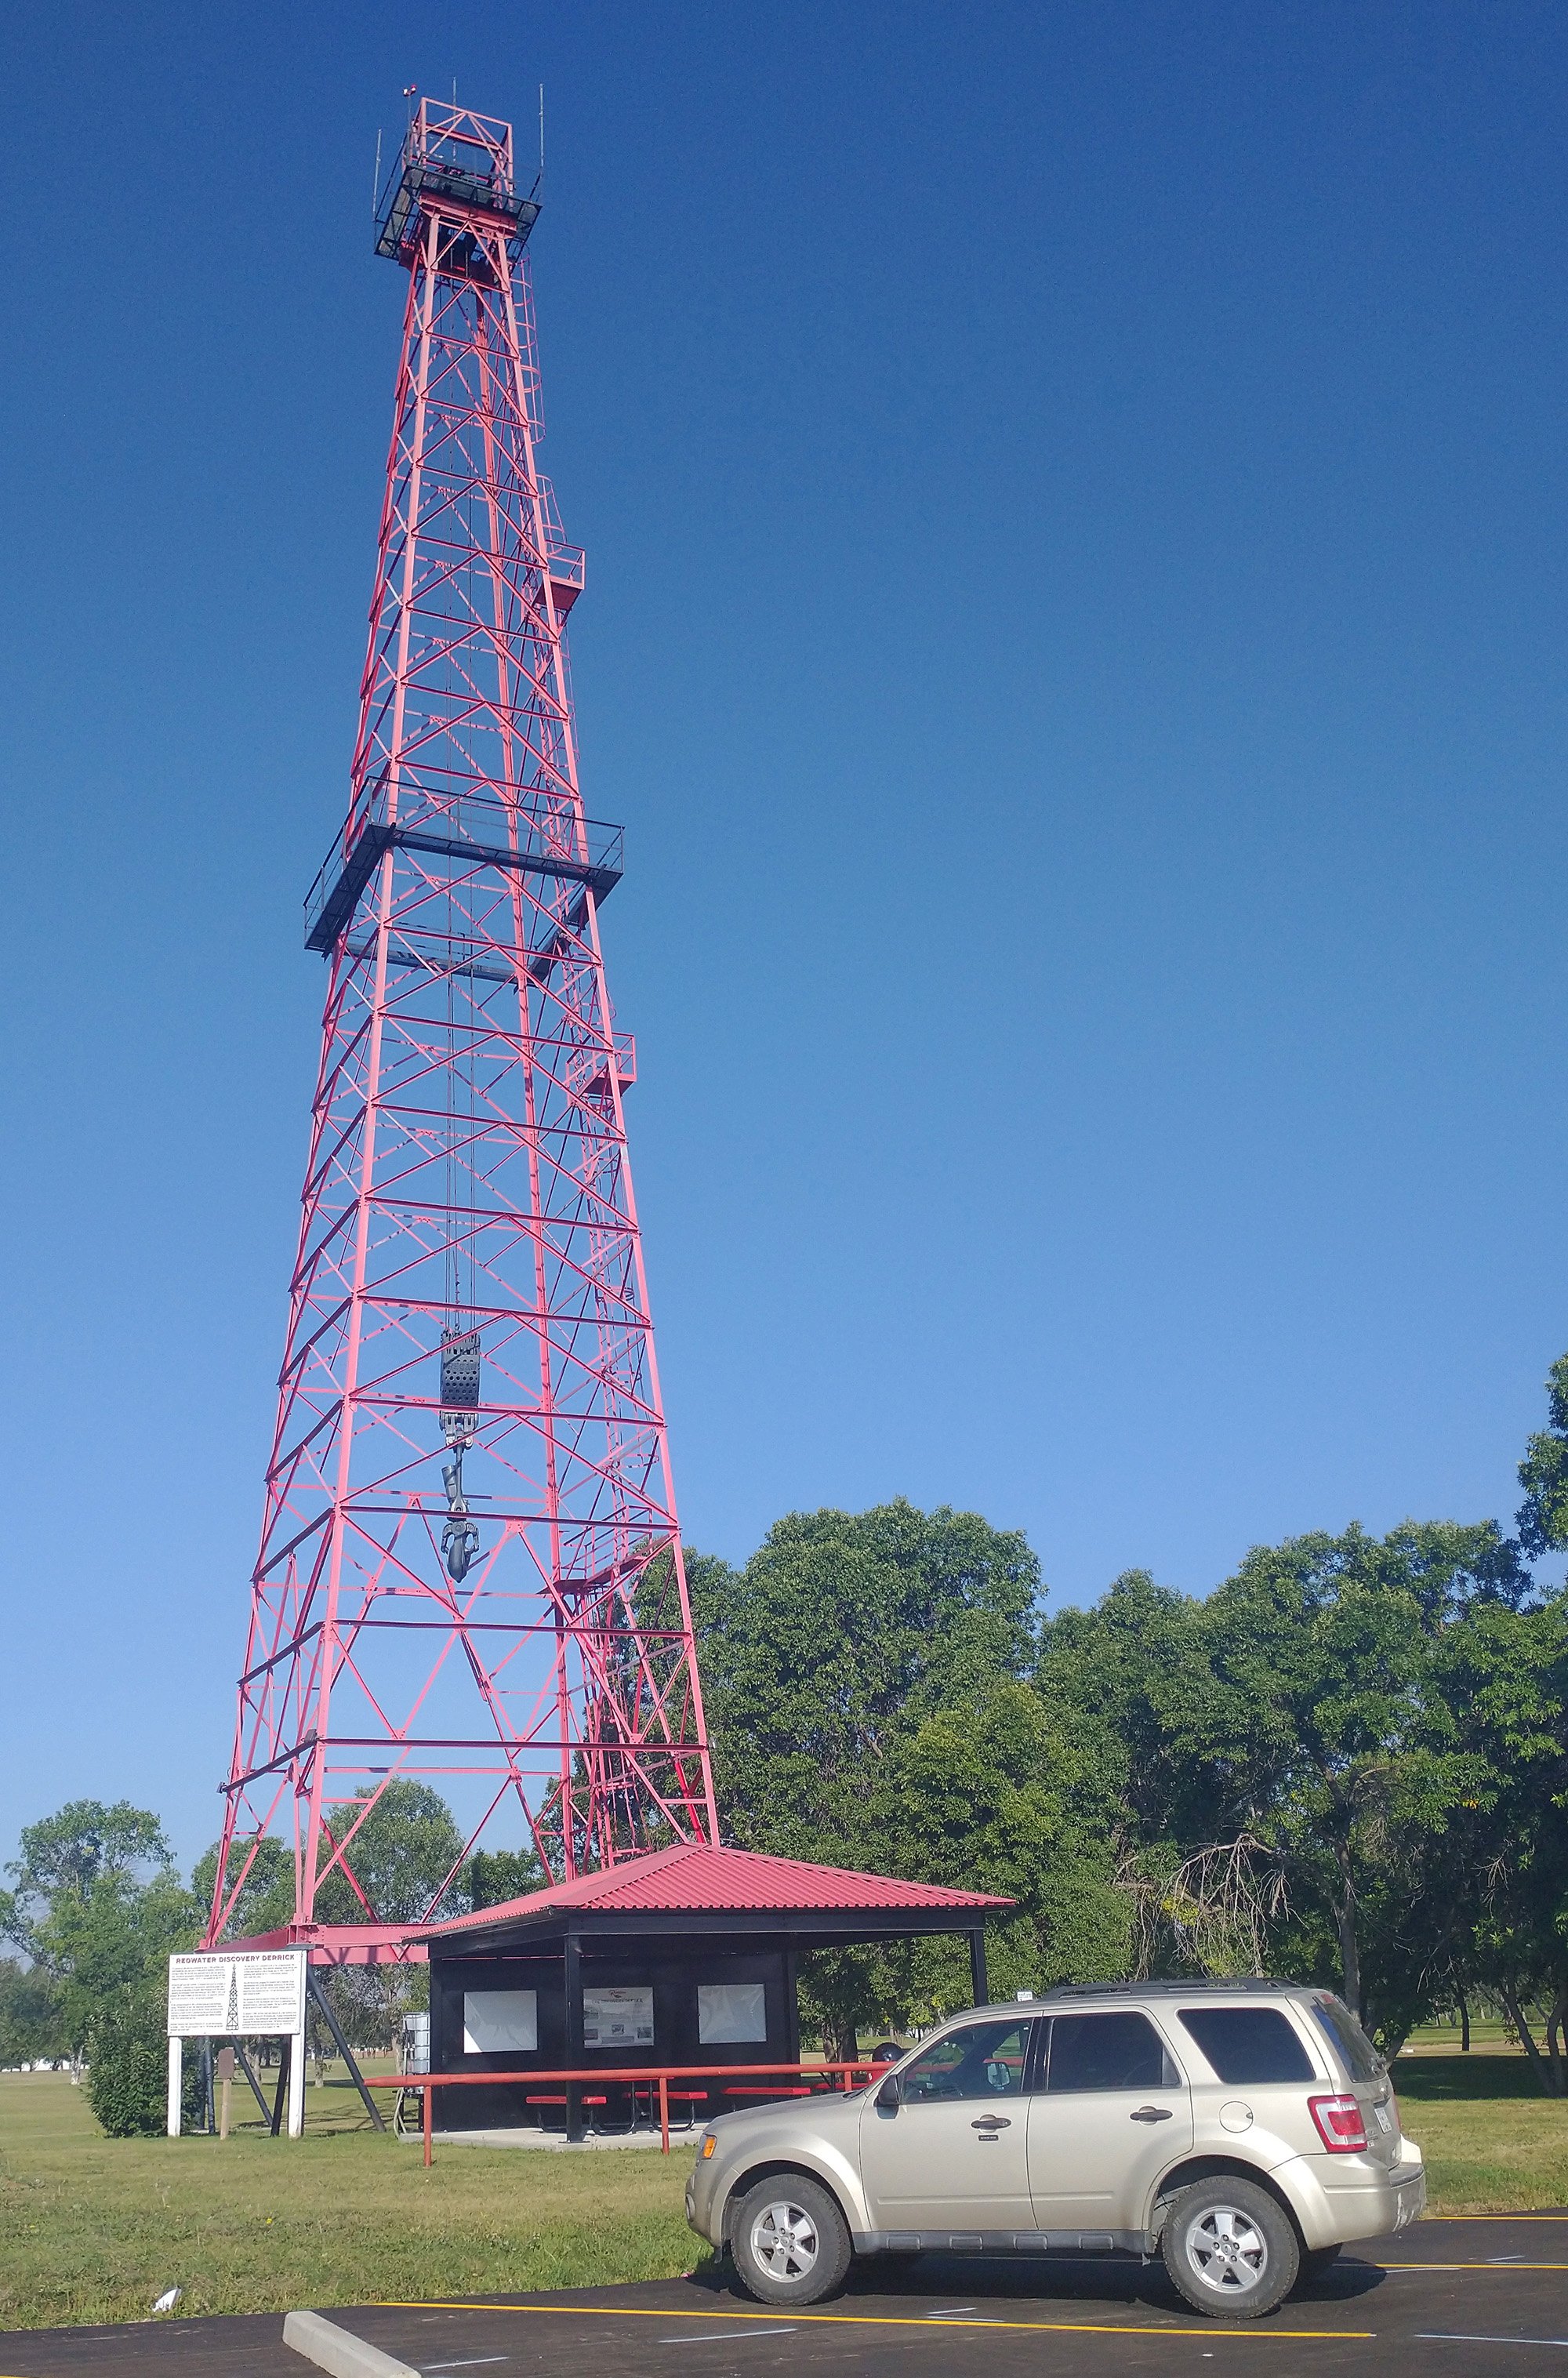 Last one: Largest Oil Derrick. Once functional, now just sitting there for tourists.